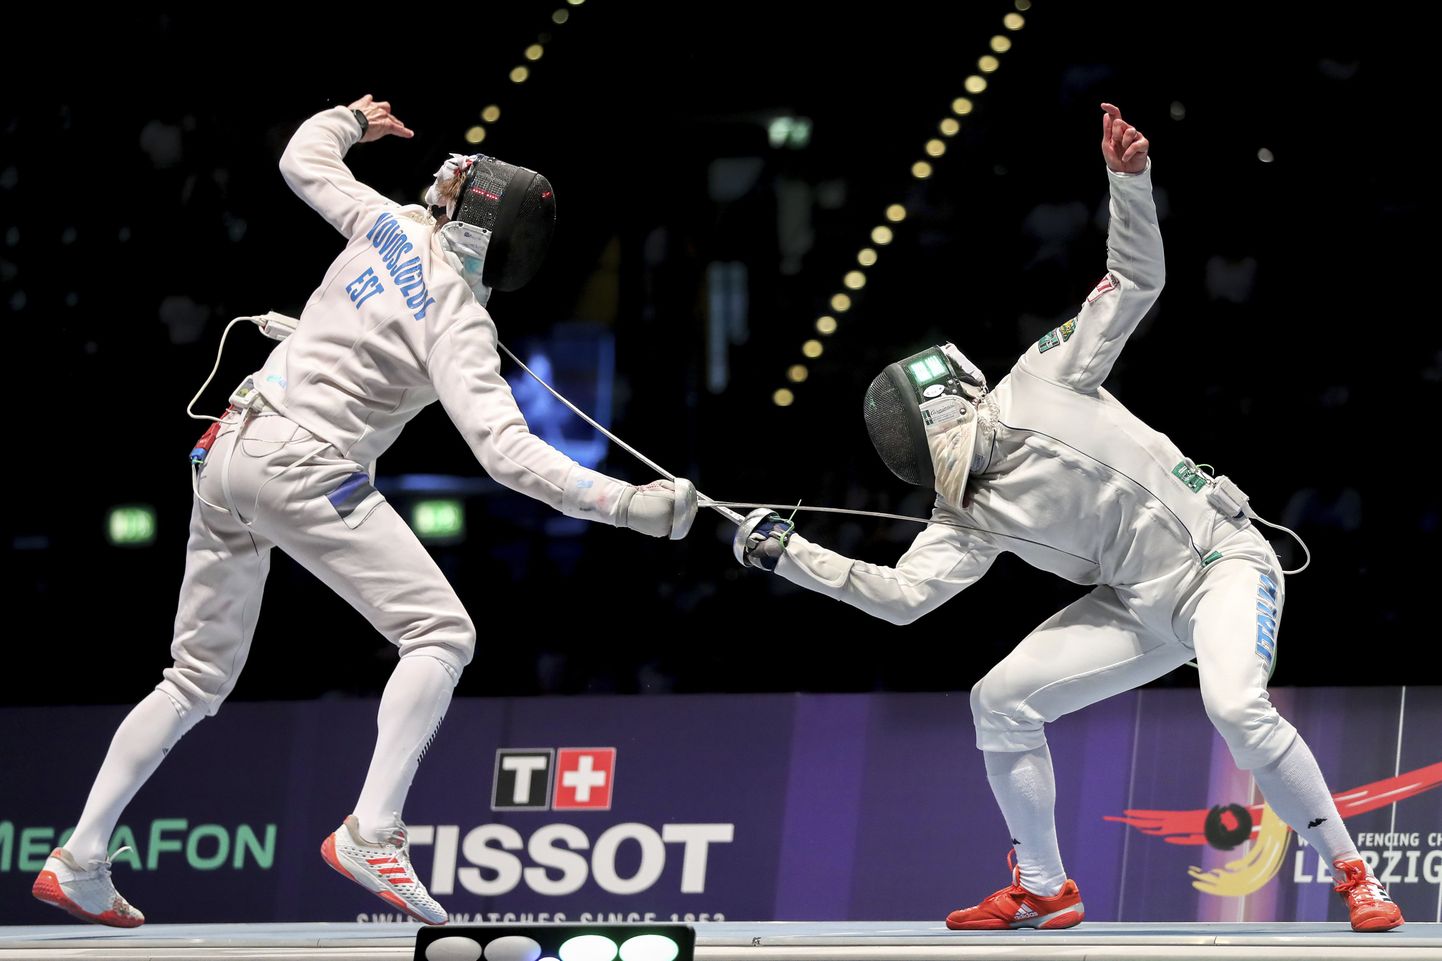 Italy's Paolo Pizzo, right, in action against Estonia's Nikolai Novosjolov during the men's epee final at the World Fencing Championships 2017 in Leipzig, Germany, Saturday, July 22, 2017. (Jan Woitas/dpa via AP)